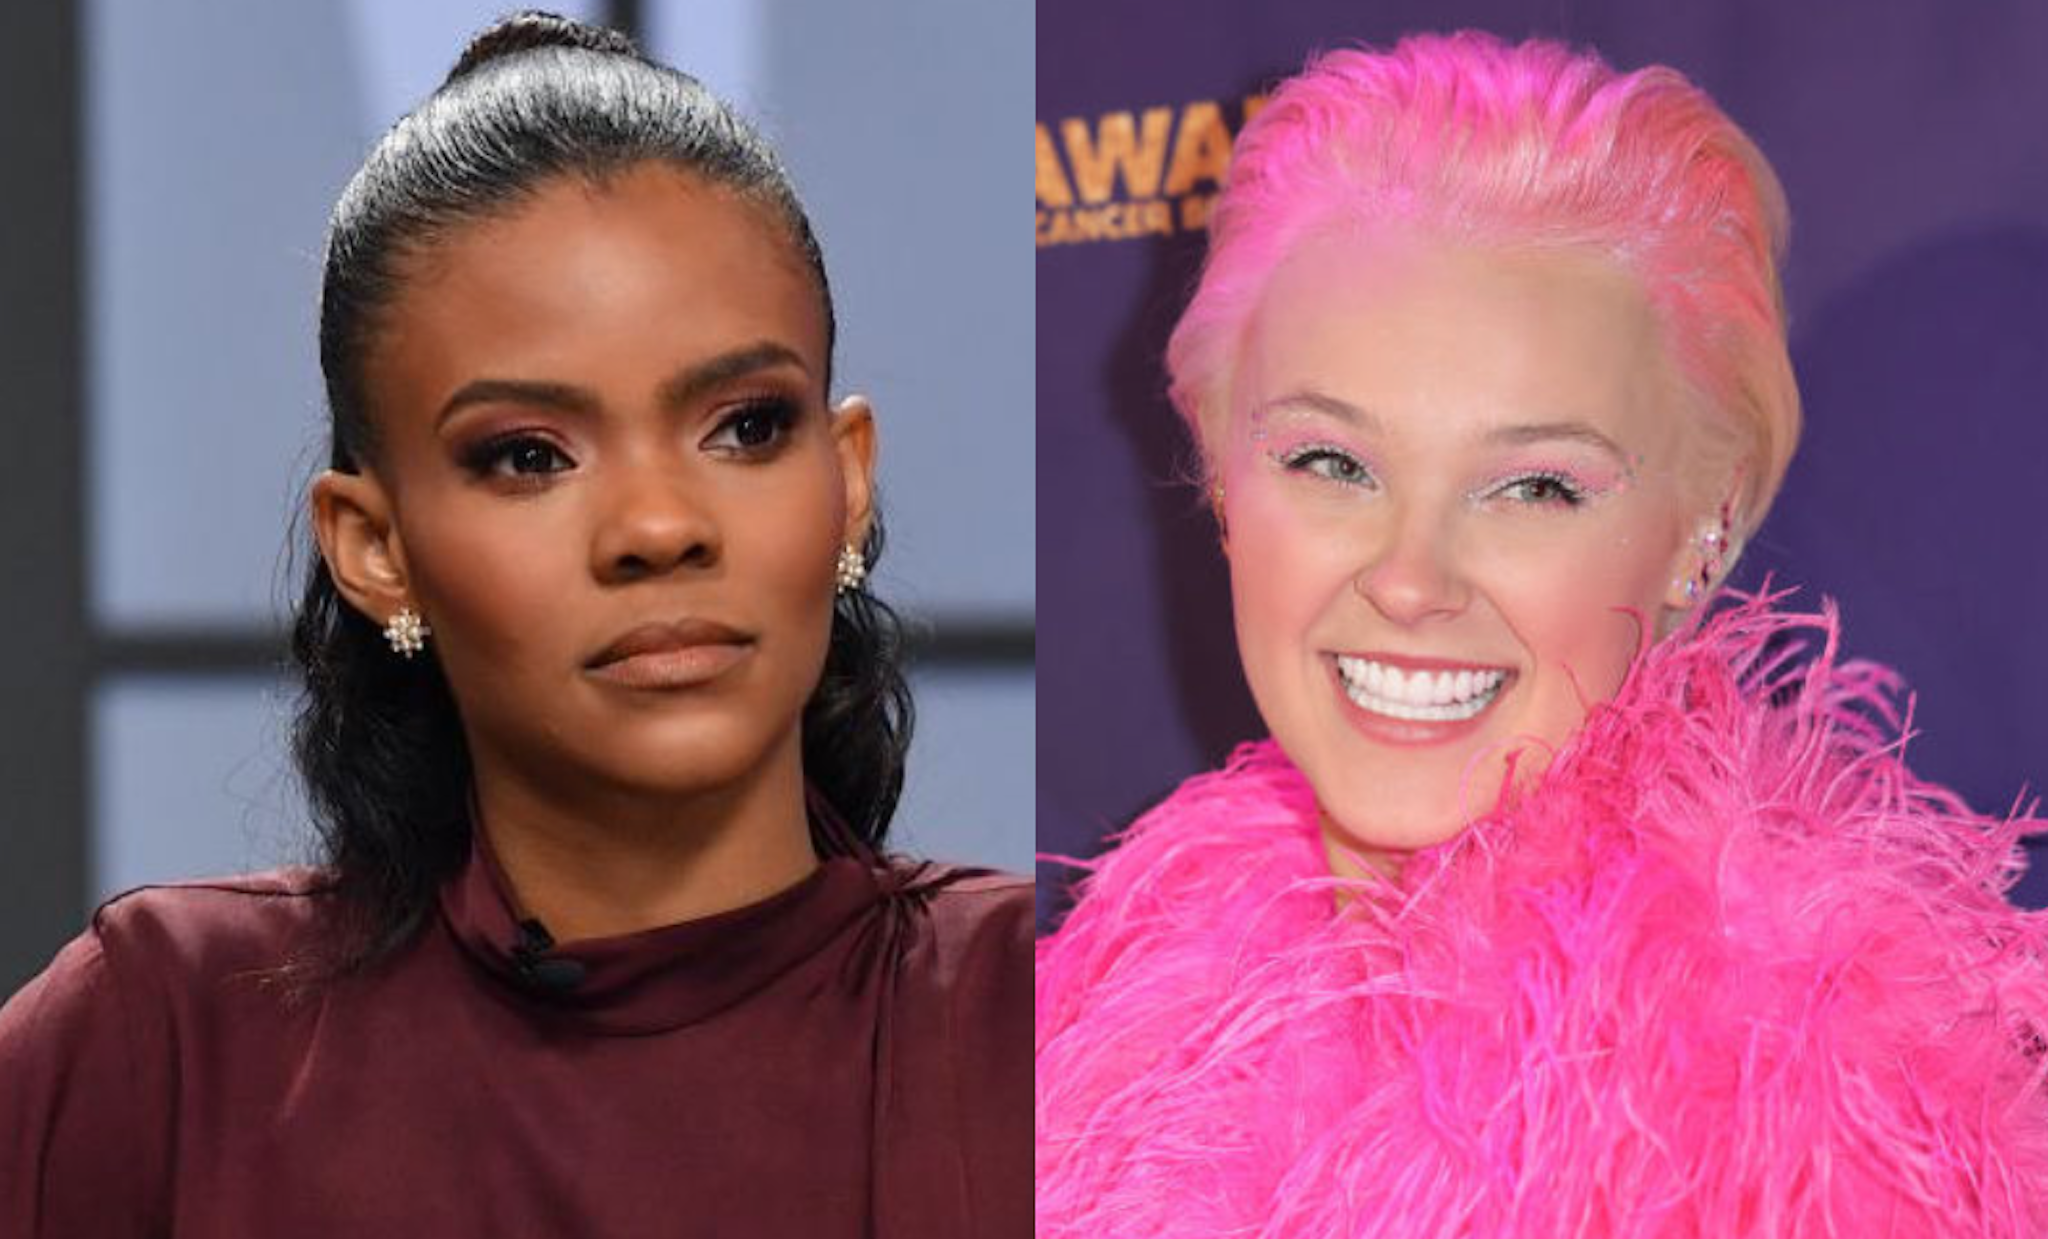 Candace Owens is seen on set of "Candace" on November 01, 2021 in Nashville, Tennessee. The show will air on Tuesday, November 2nd. //JoJo Siwa attends the 2022 Industry Dance Awards at Avalon Hollywood & Bardot on October 12, 2022 in Los Angeles, California.